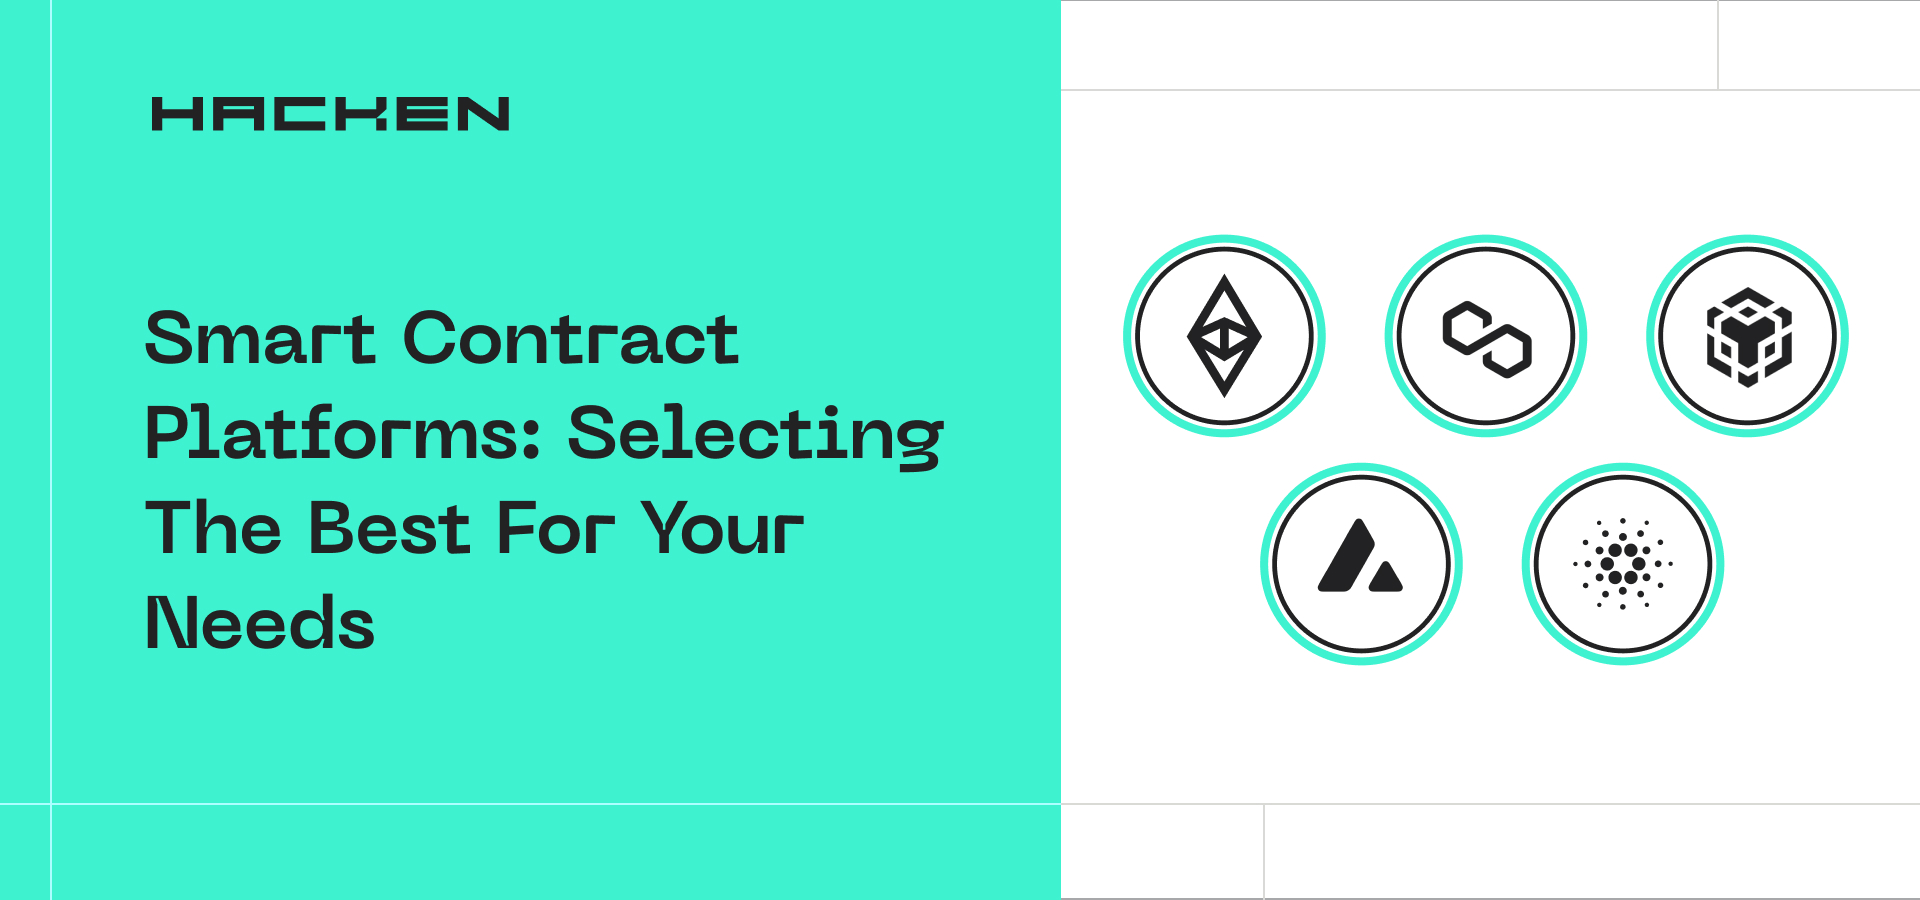 Smart Contract Platforms: Selecting The Best For Your Needs